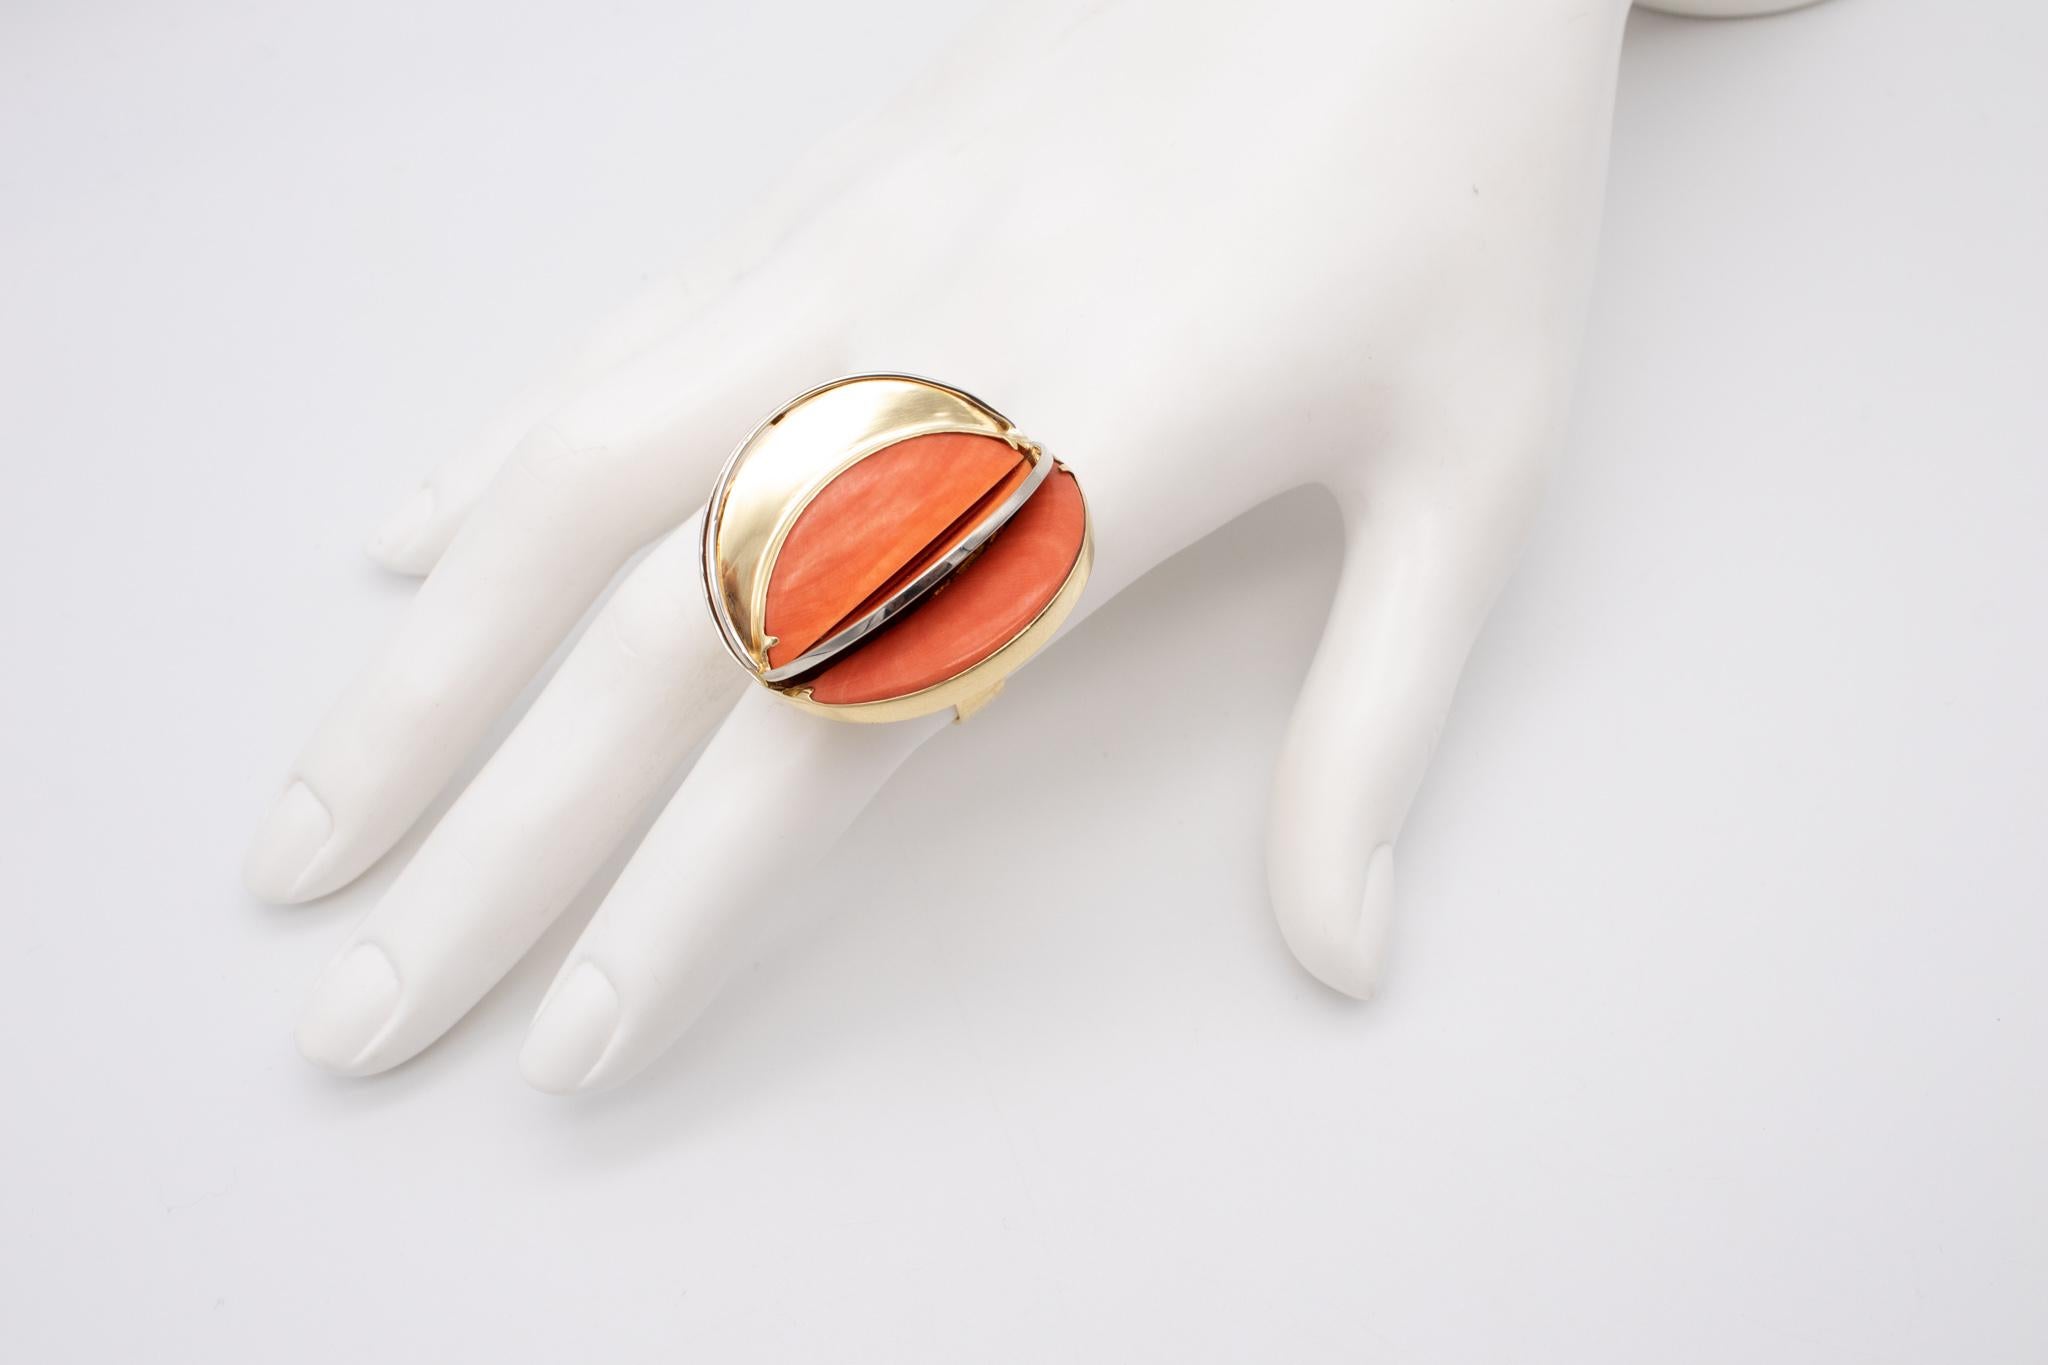 Cabochon Laura Rivalta 1977 Italy Geometric Sculptural OP Art Ring 18Kt Gold With Coral For Sale